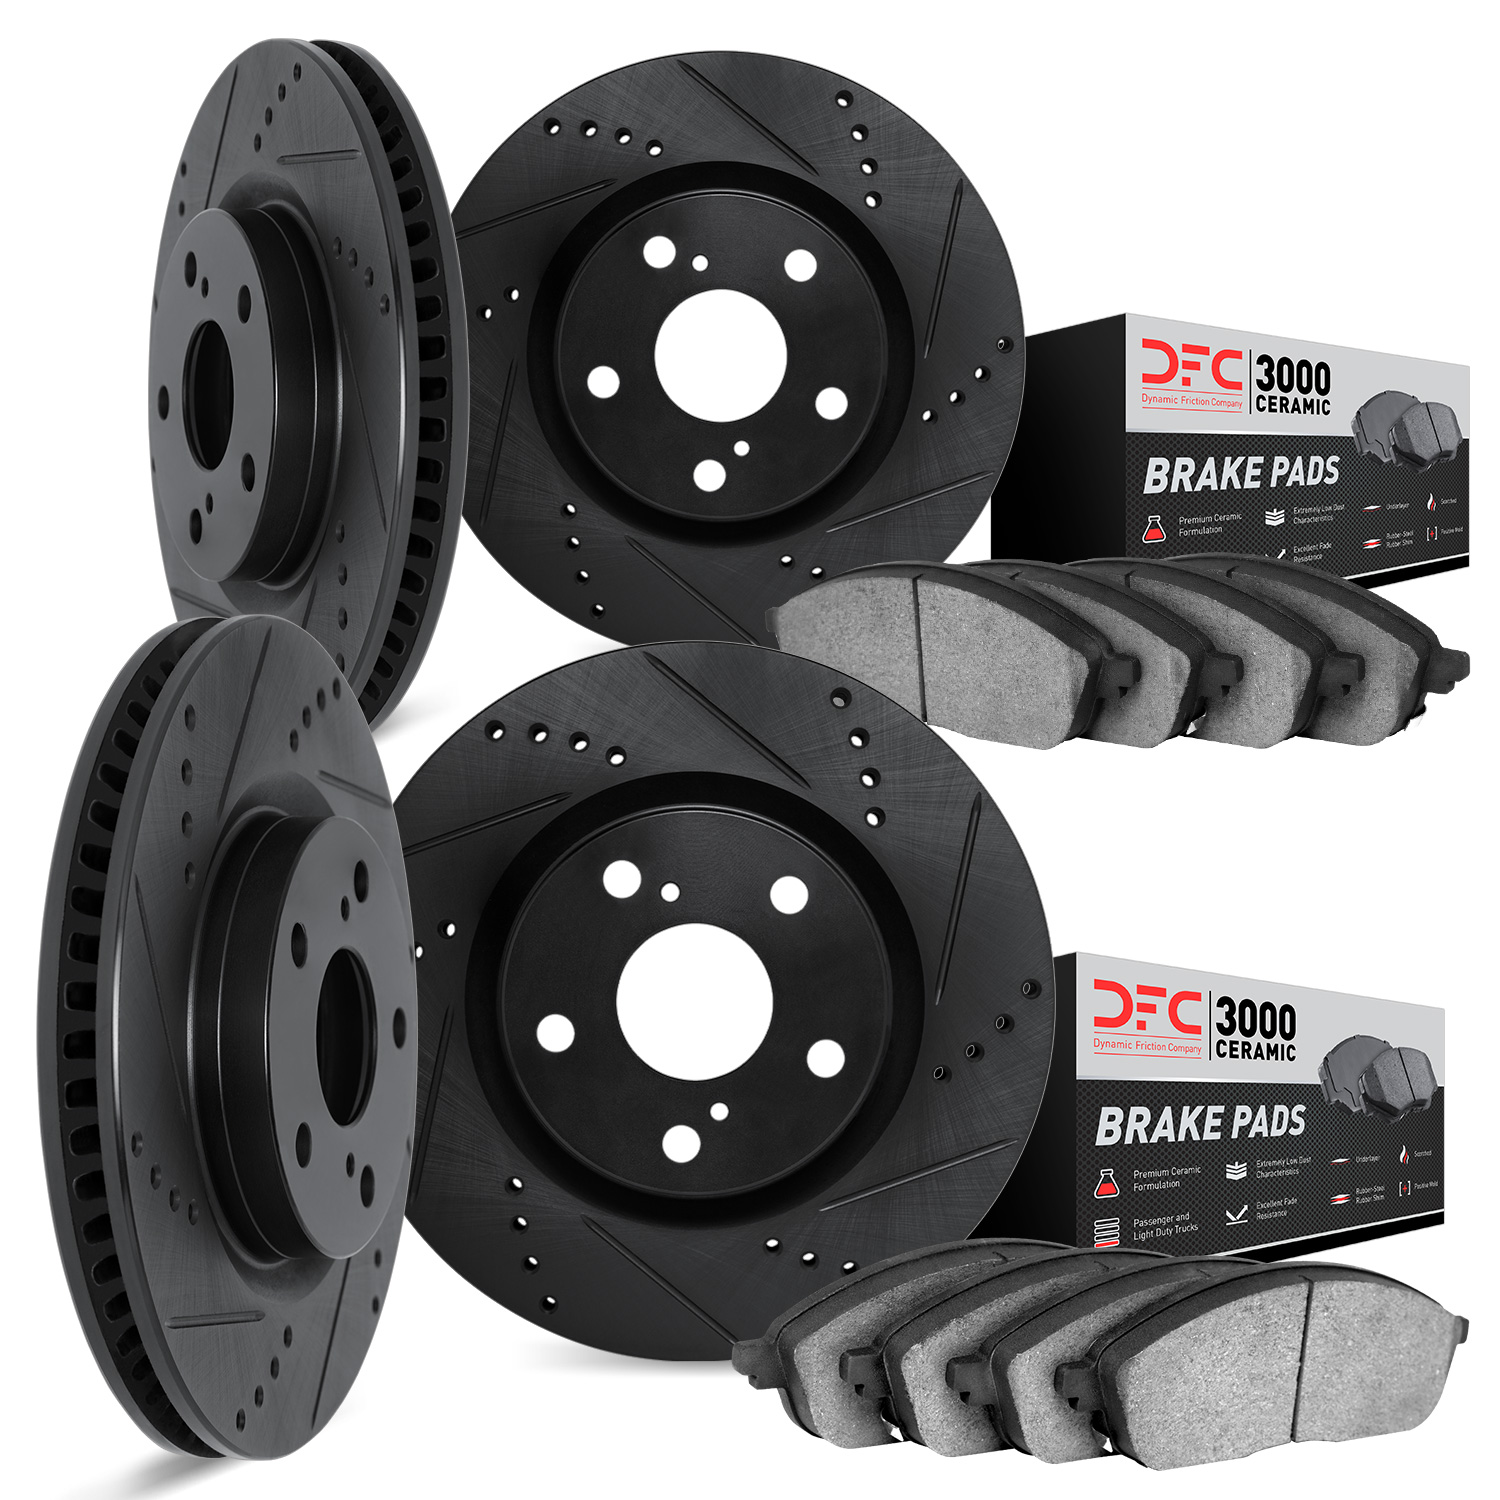 8304-31067 Drilled/Slotted Brake Rotors with 3000-Series Ceramic Brake Pads Kit [Black], 2007-2015 BMW, Position: Front and Rear